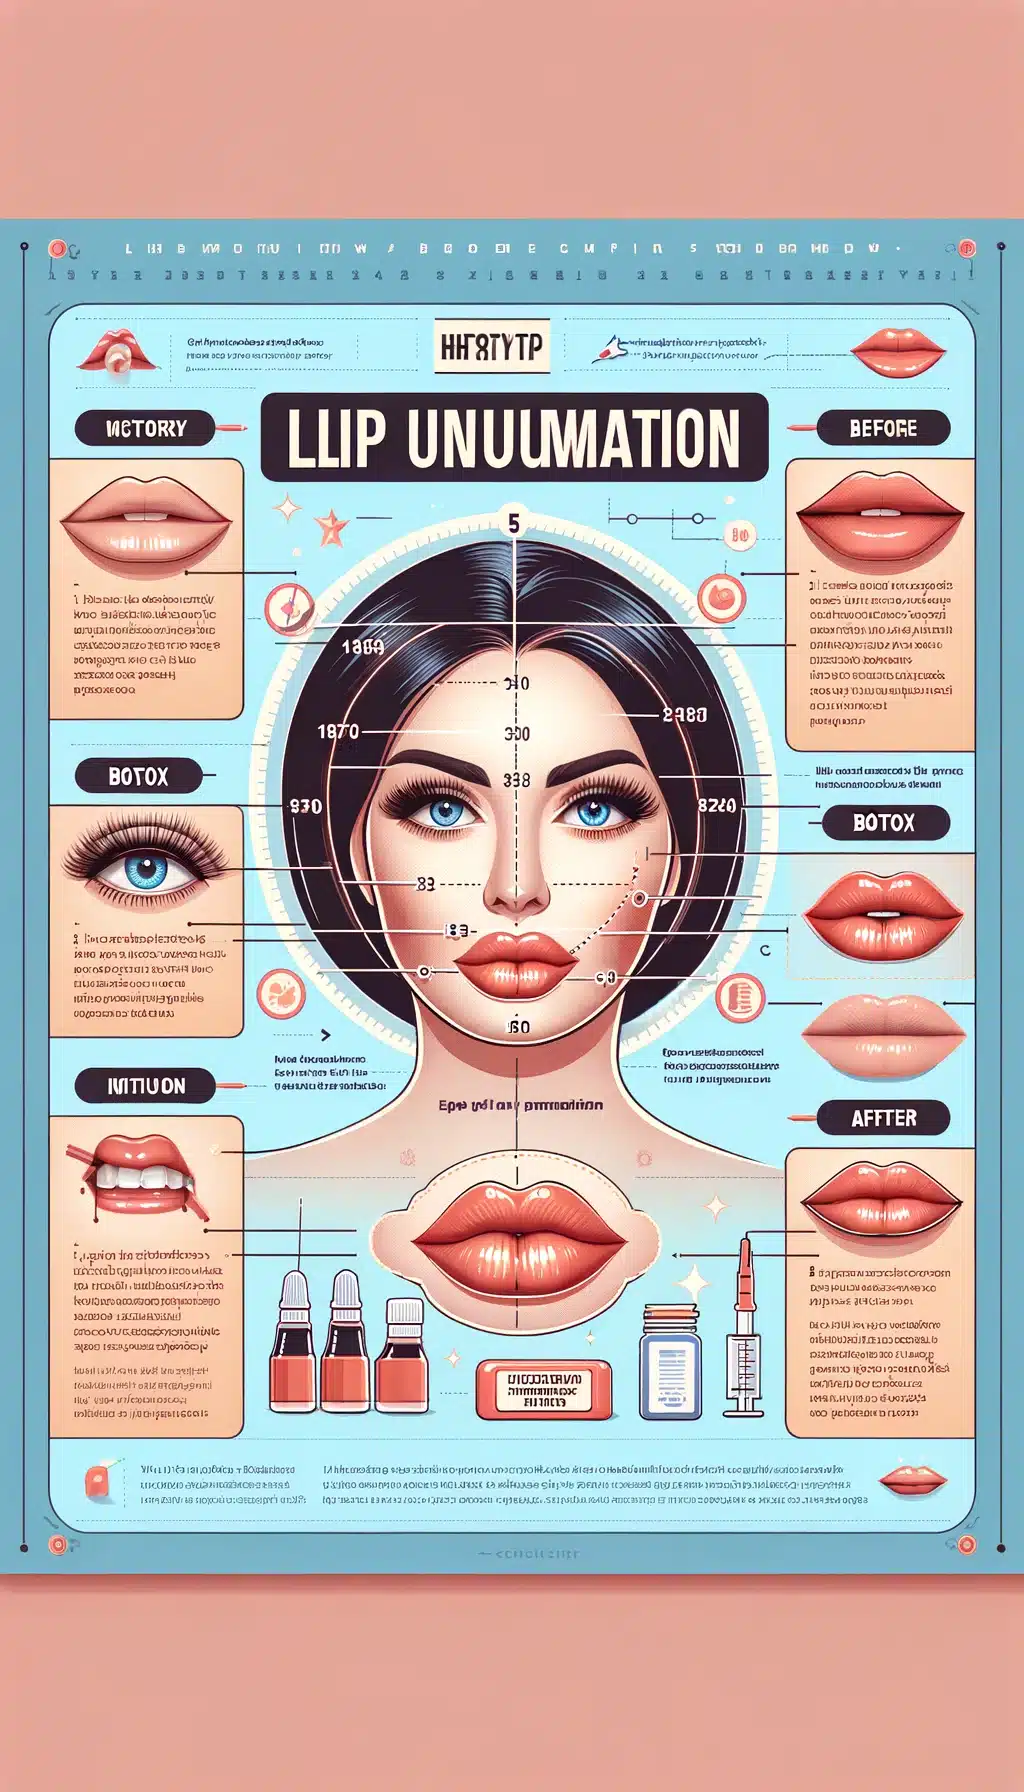 Another type of lip augmentation is lip implants, which involve surgically inserting synthetic implants into the lips to increase volume and definition.